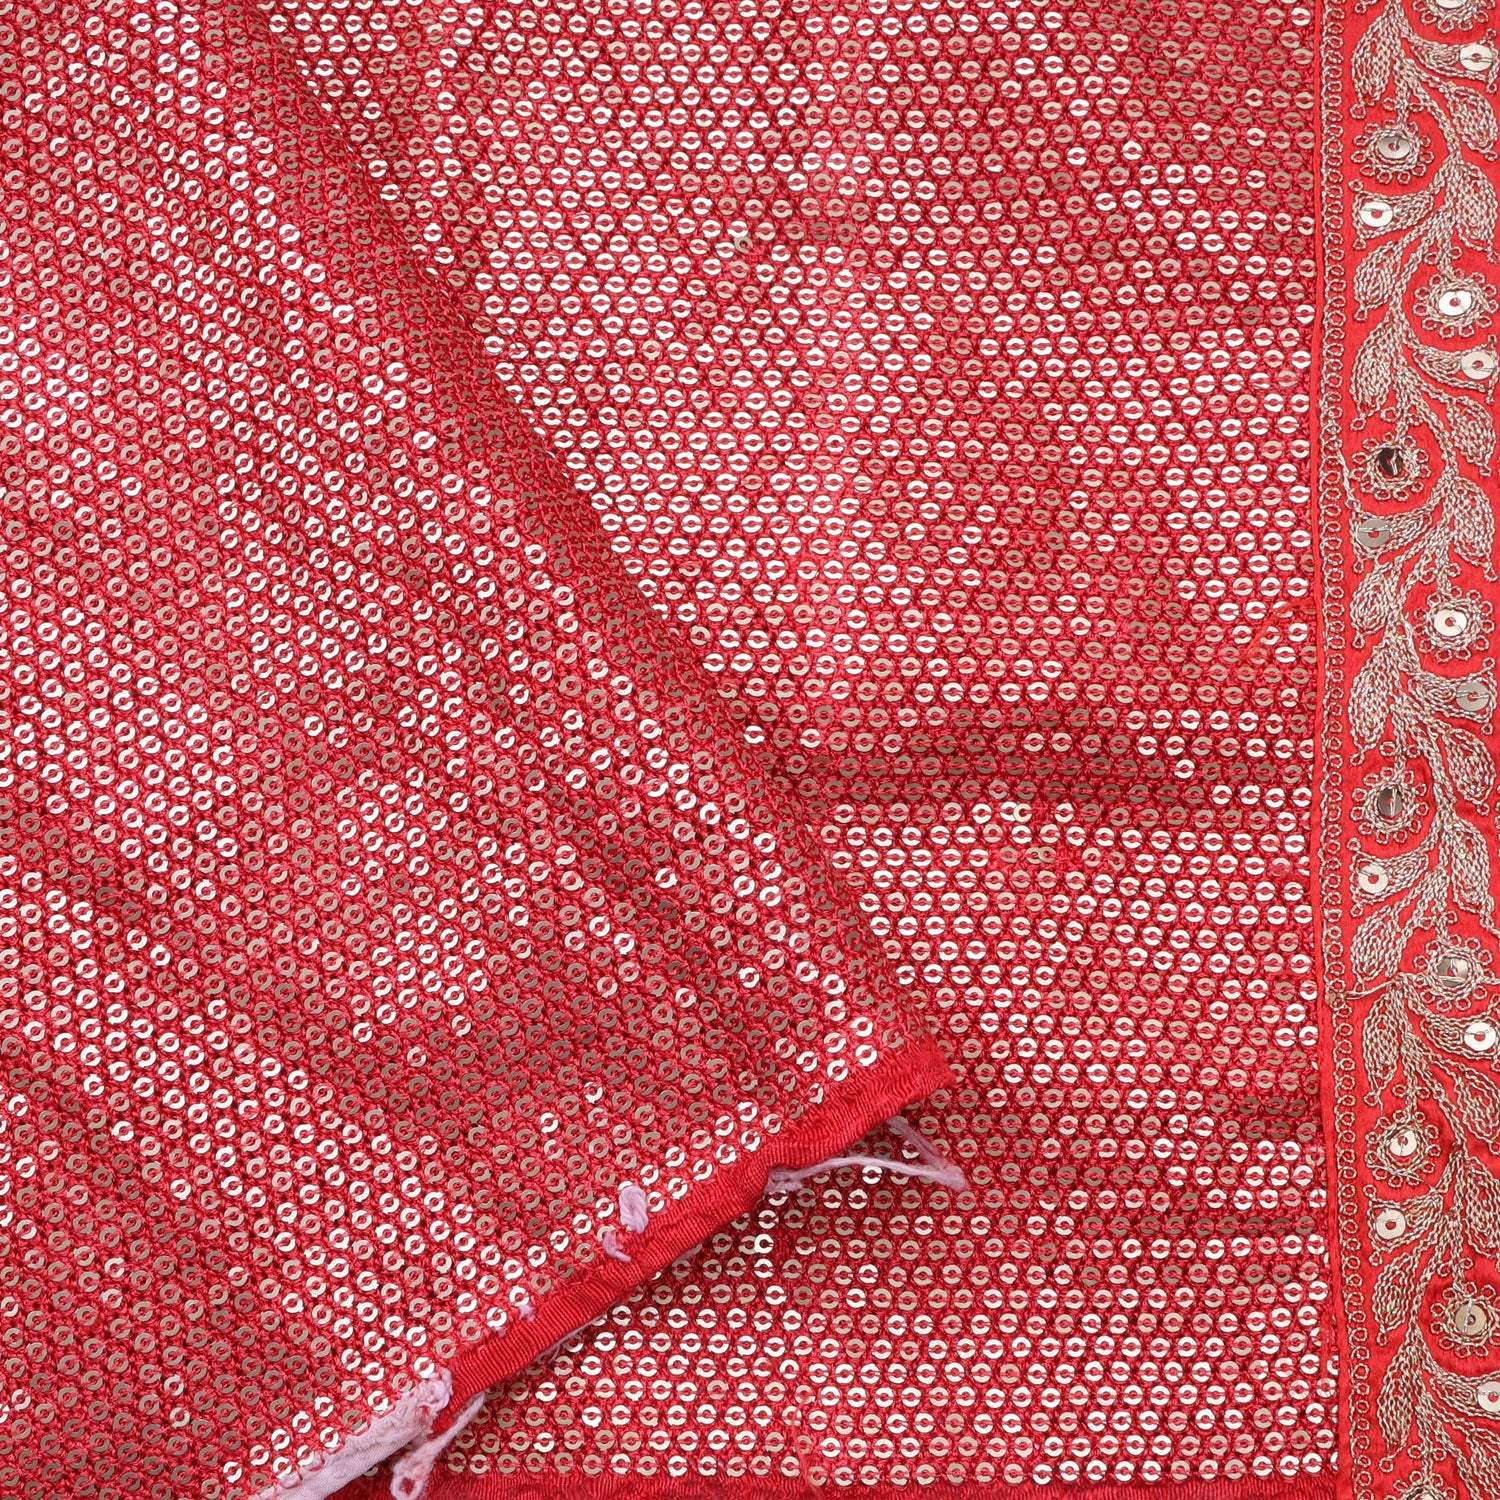 Tomato Red Printed Bandhani Silk Saree With Embroidery - Singhania's